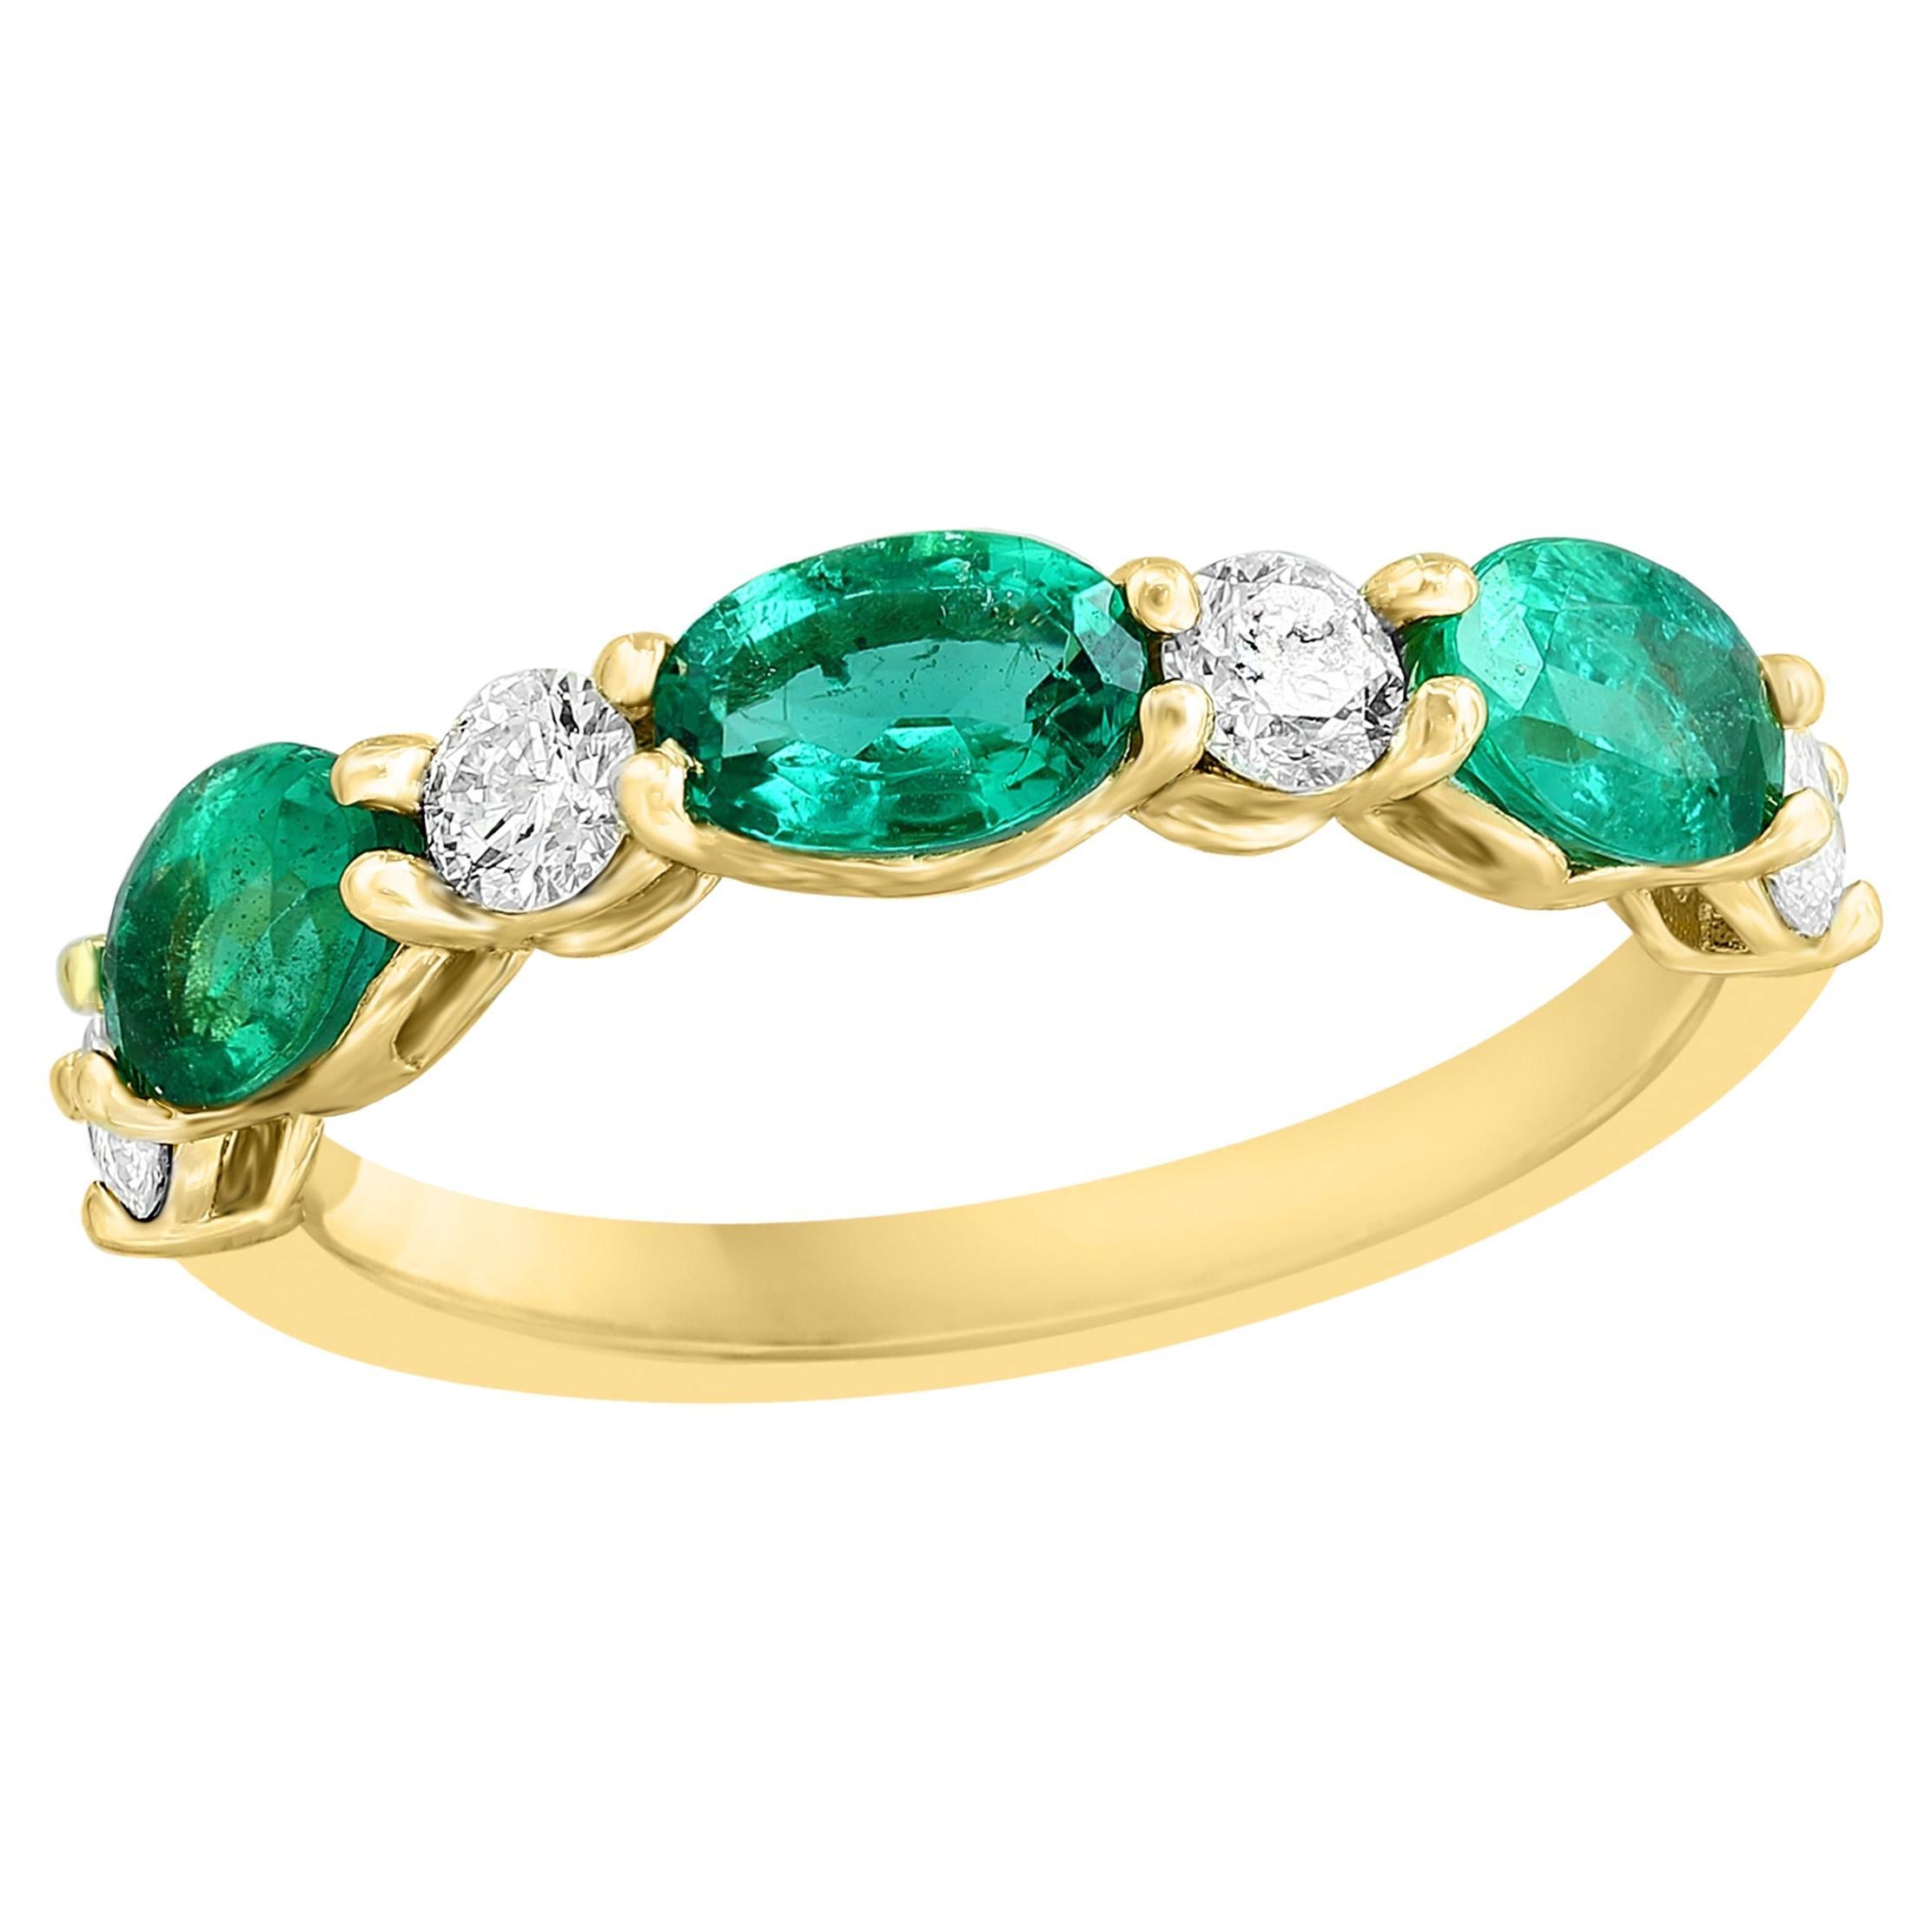 1.27 Carat Oval Cut Emerald and Diamond Band in 14K Yellow Gold